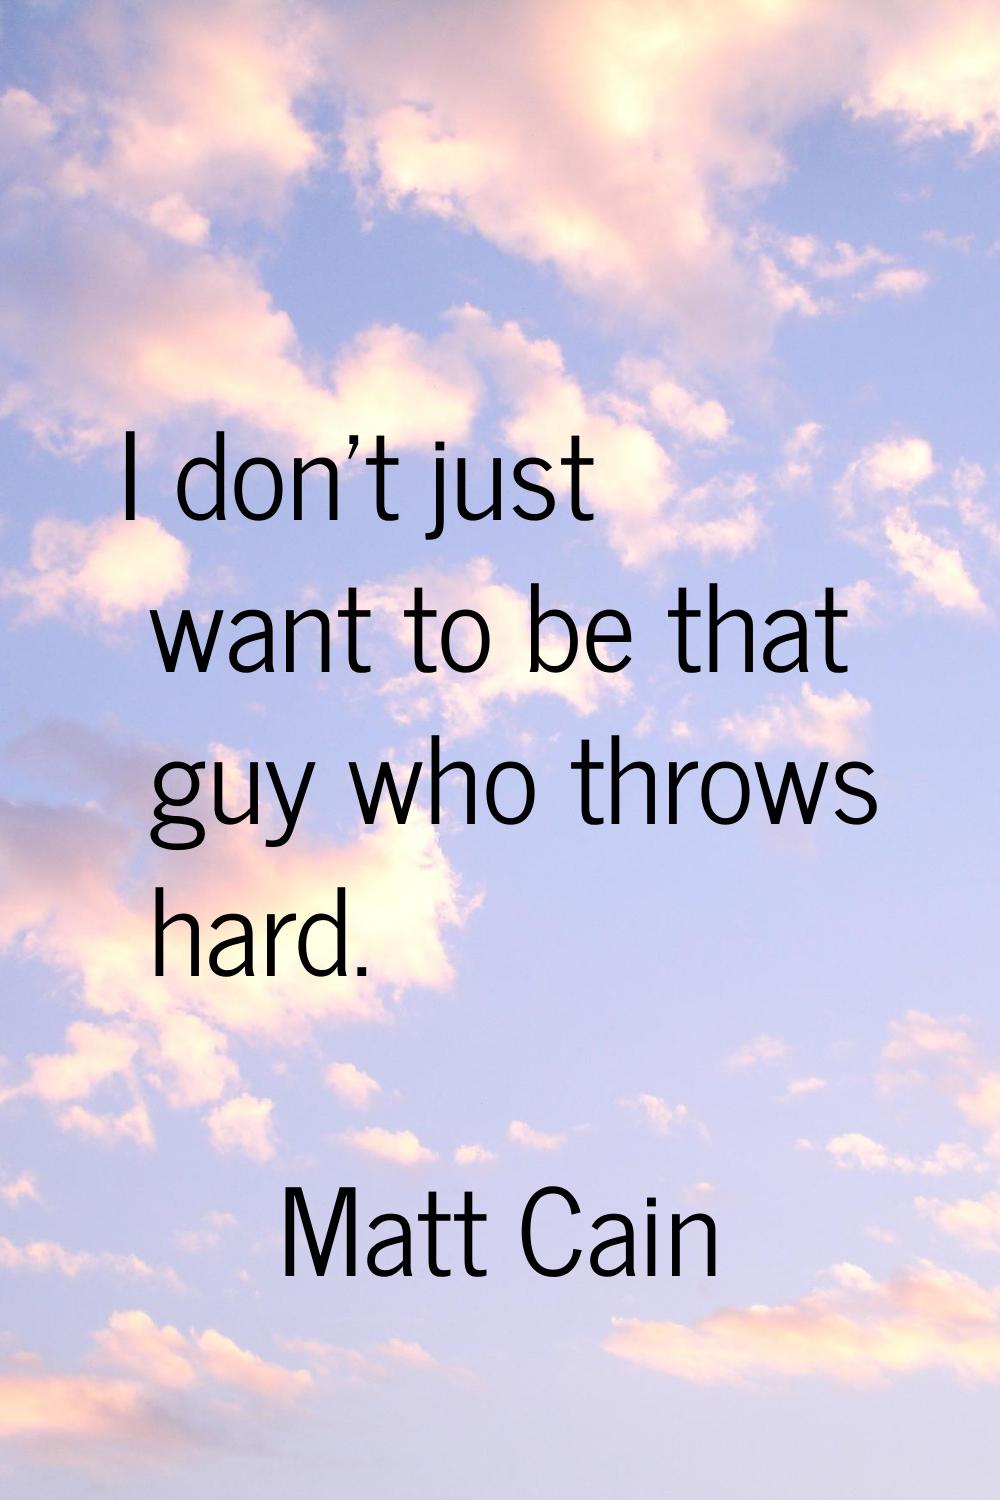 I don't just want to be that guy who throws hard.